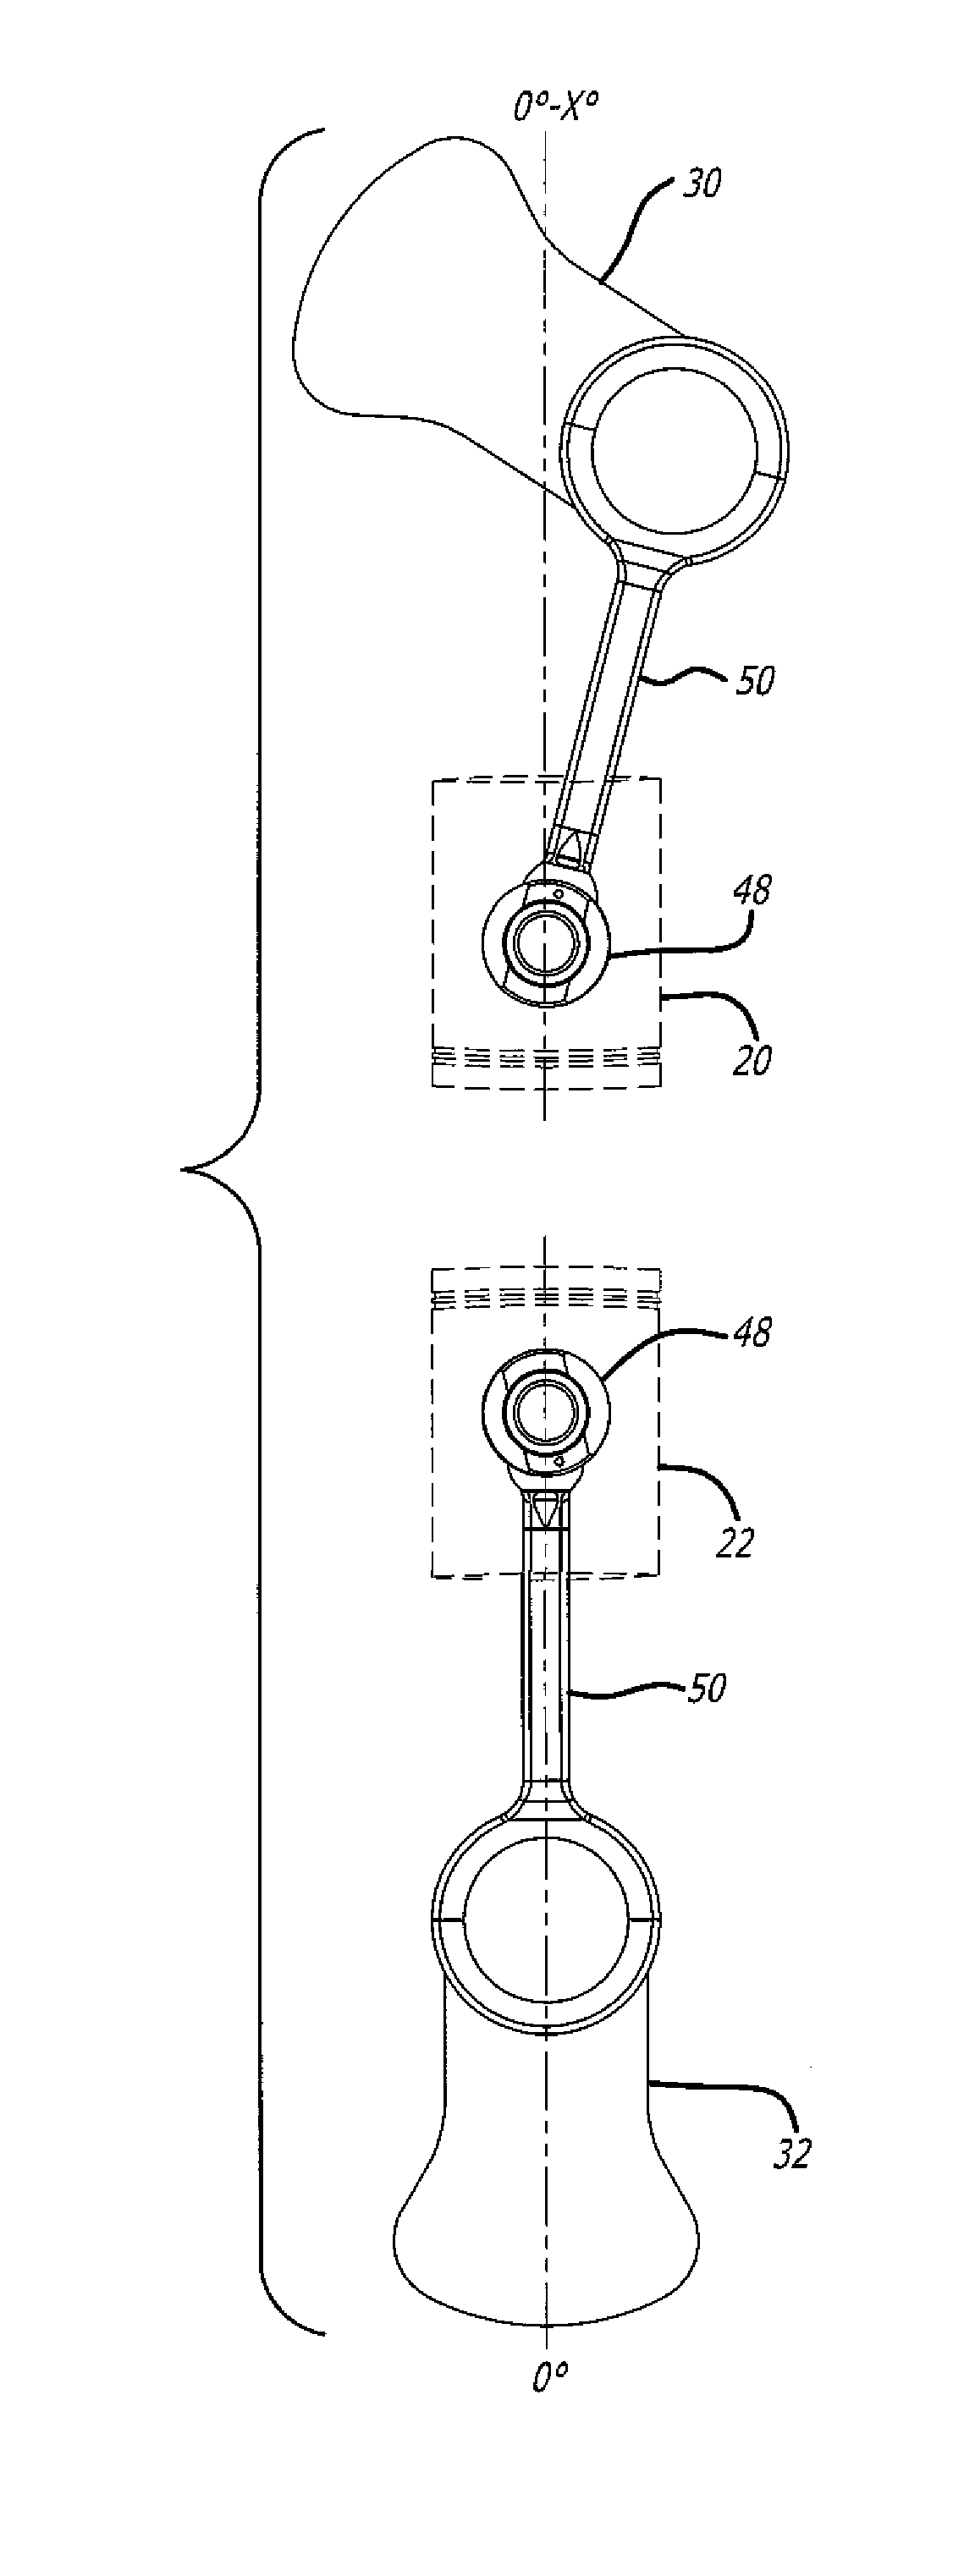 Load Transfer Point Offset Of Rocking Journal Wristpins In Uniflow-Scavenged, Opposed-Piston Engines With Phased Crankshafts